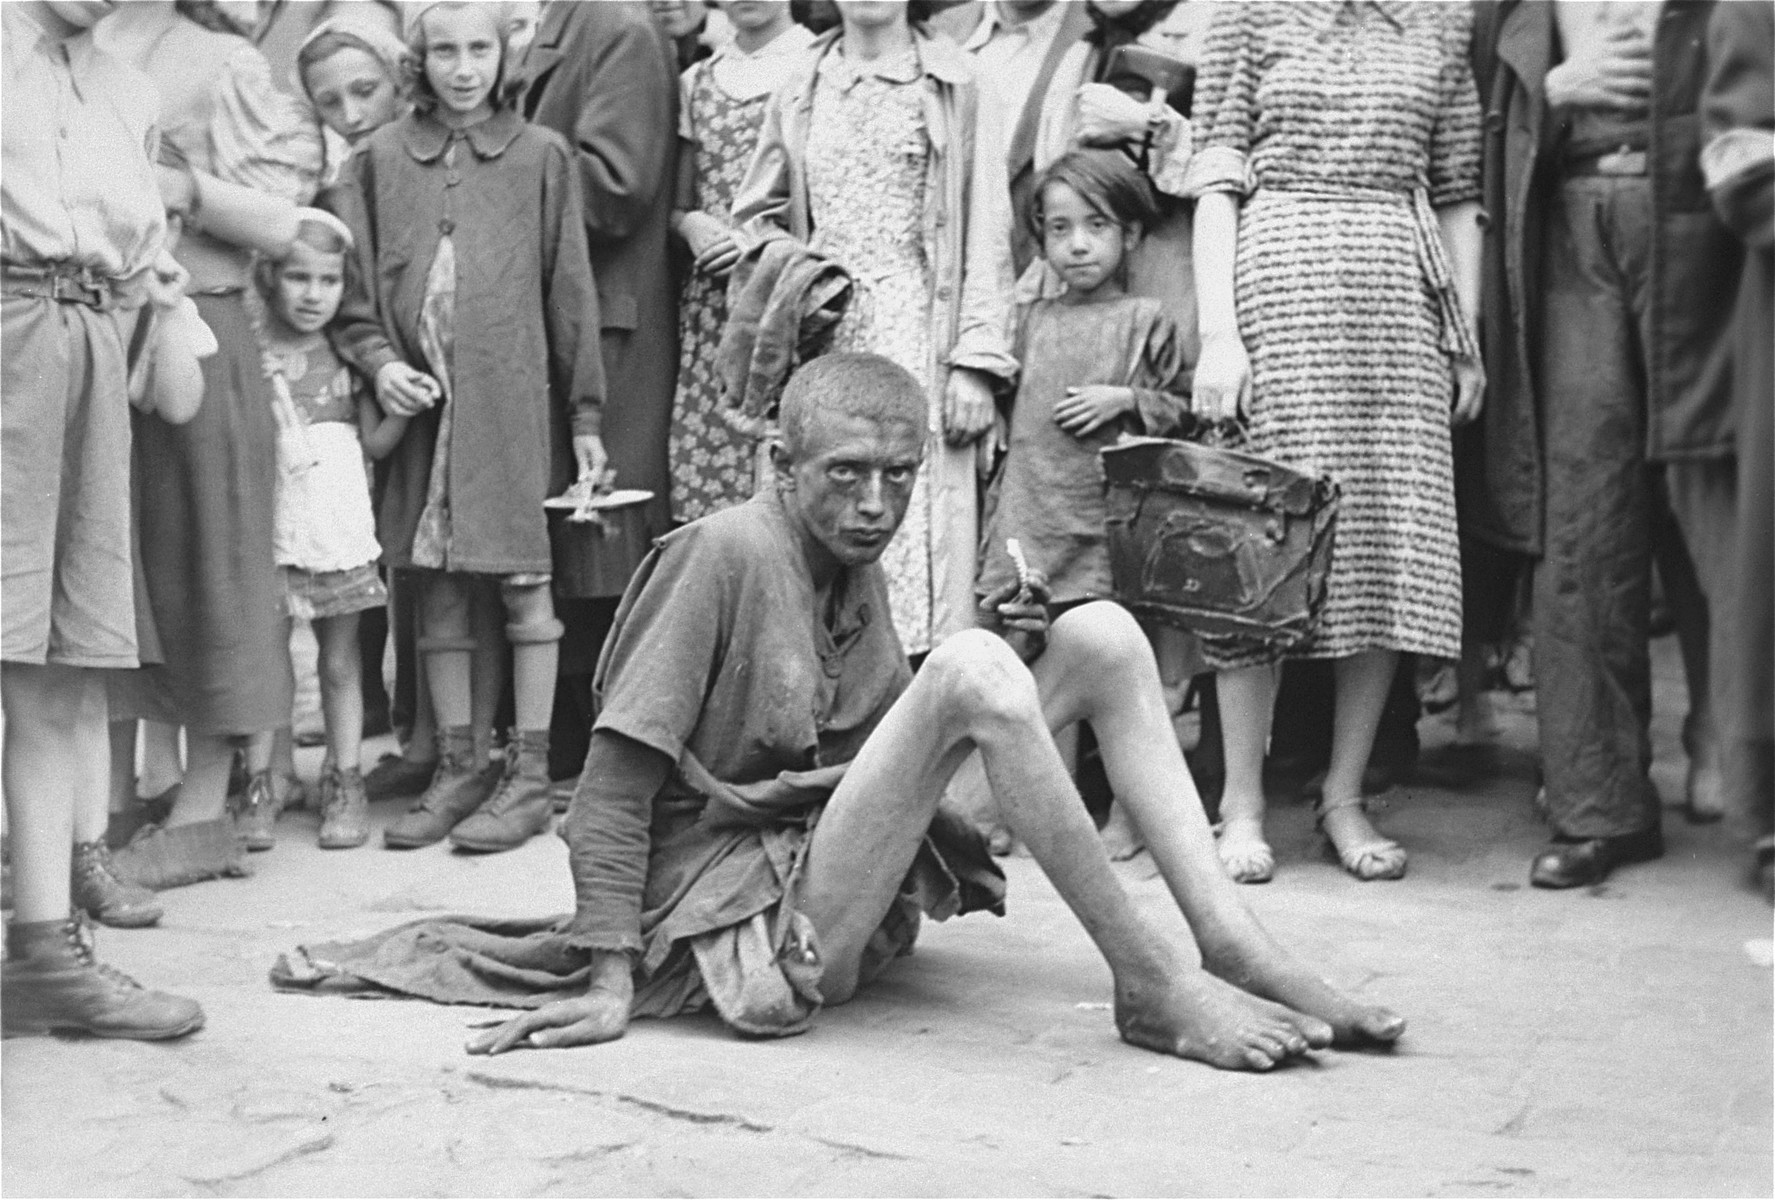 A destitute youth sits on the pavement in the Warsaw ghetto surrounded by other Jews.